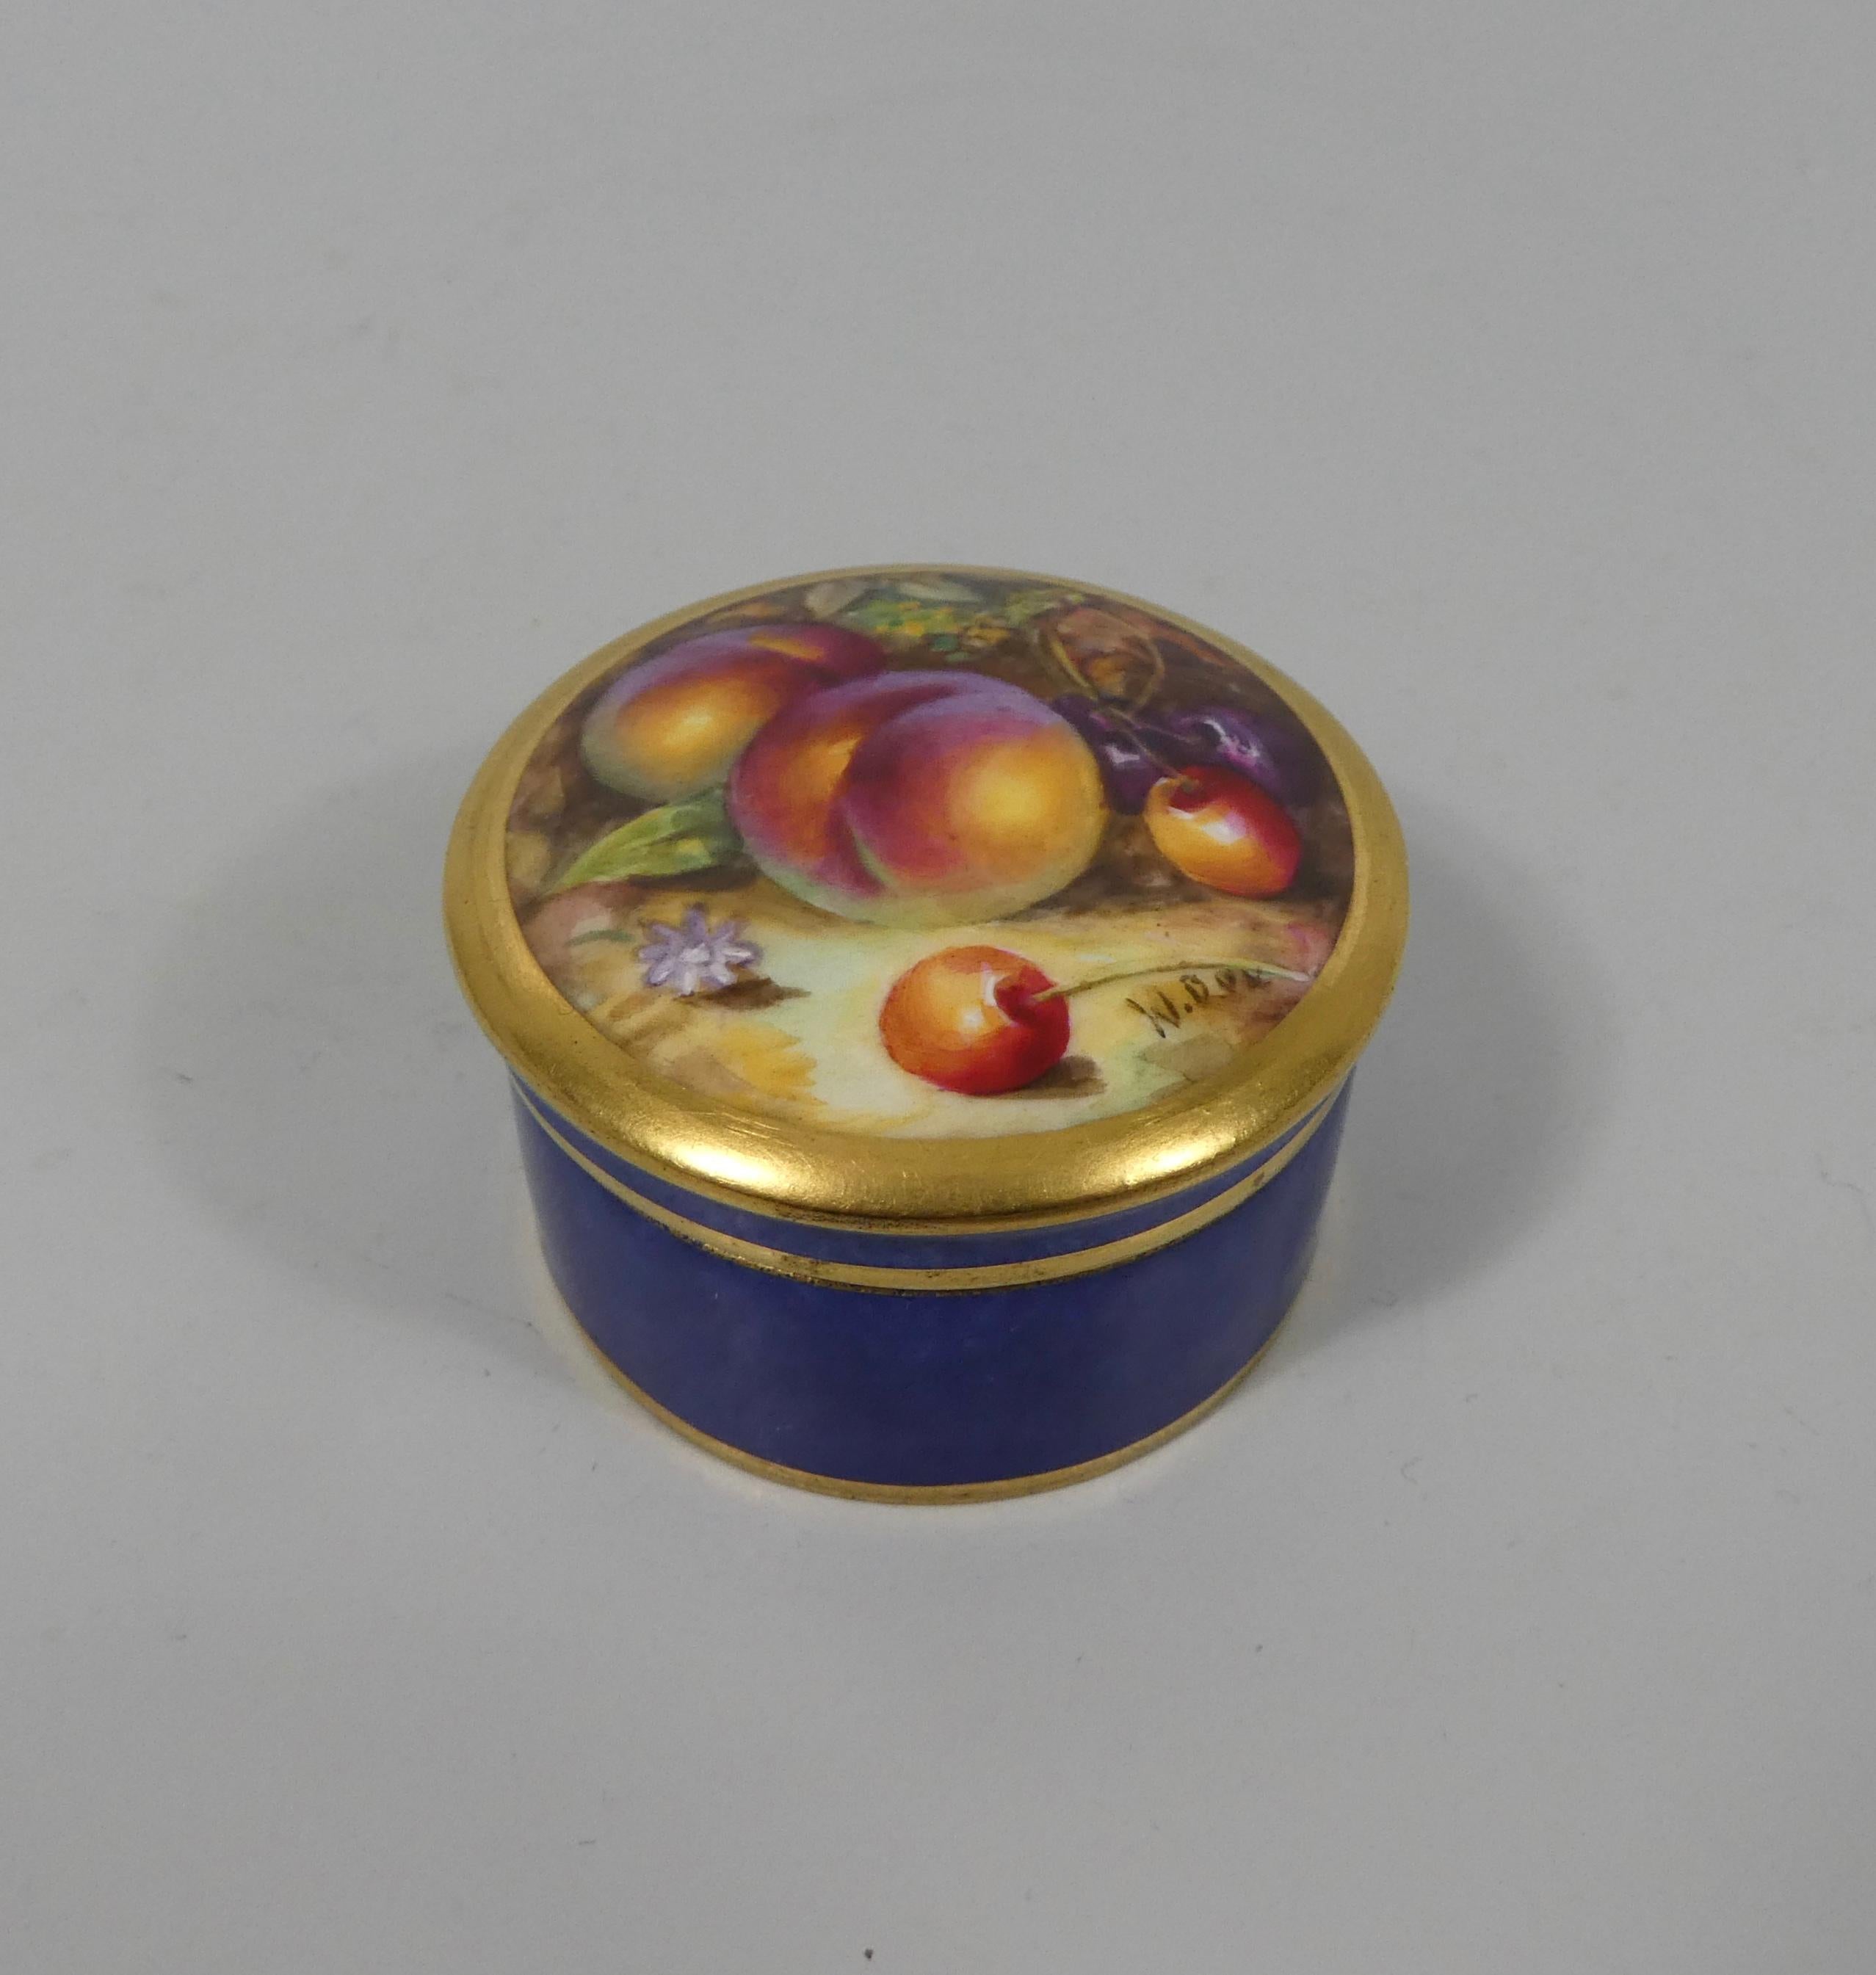 Porcelain Royal Worcester Pill Box, Fruit Painted, by William Bee, Dated 1924